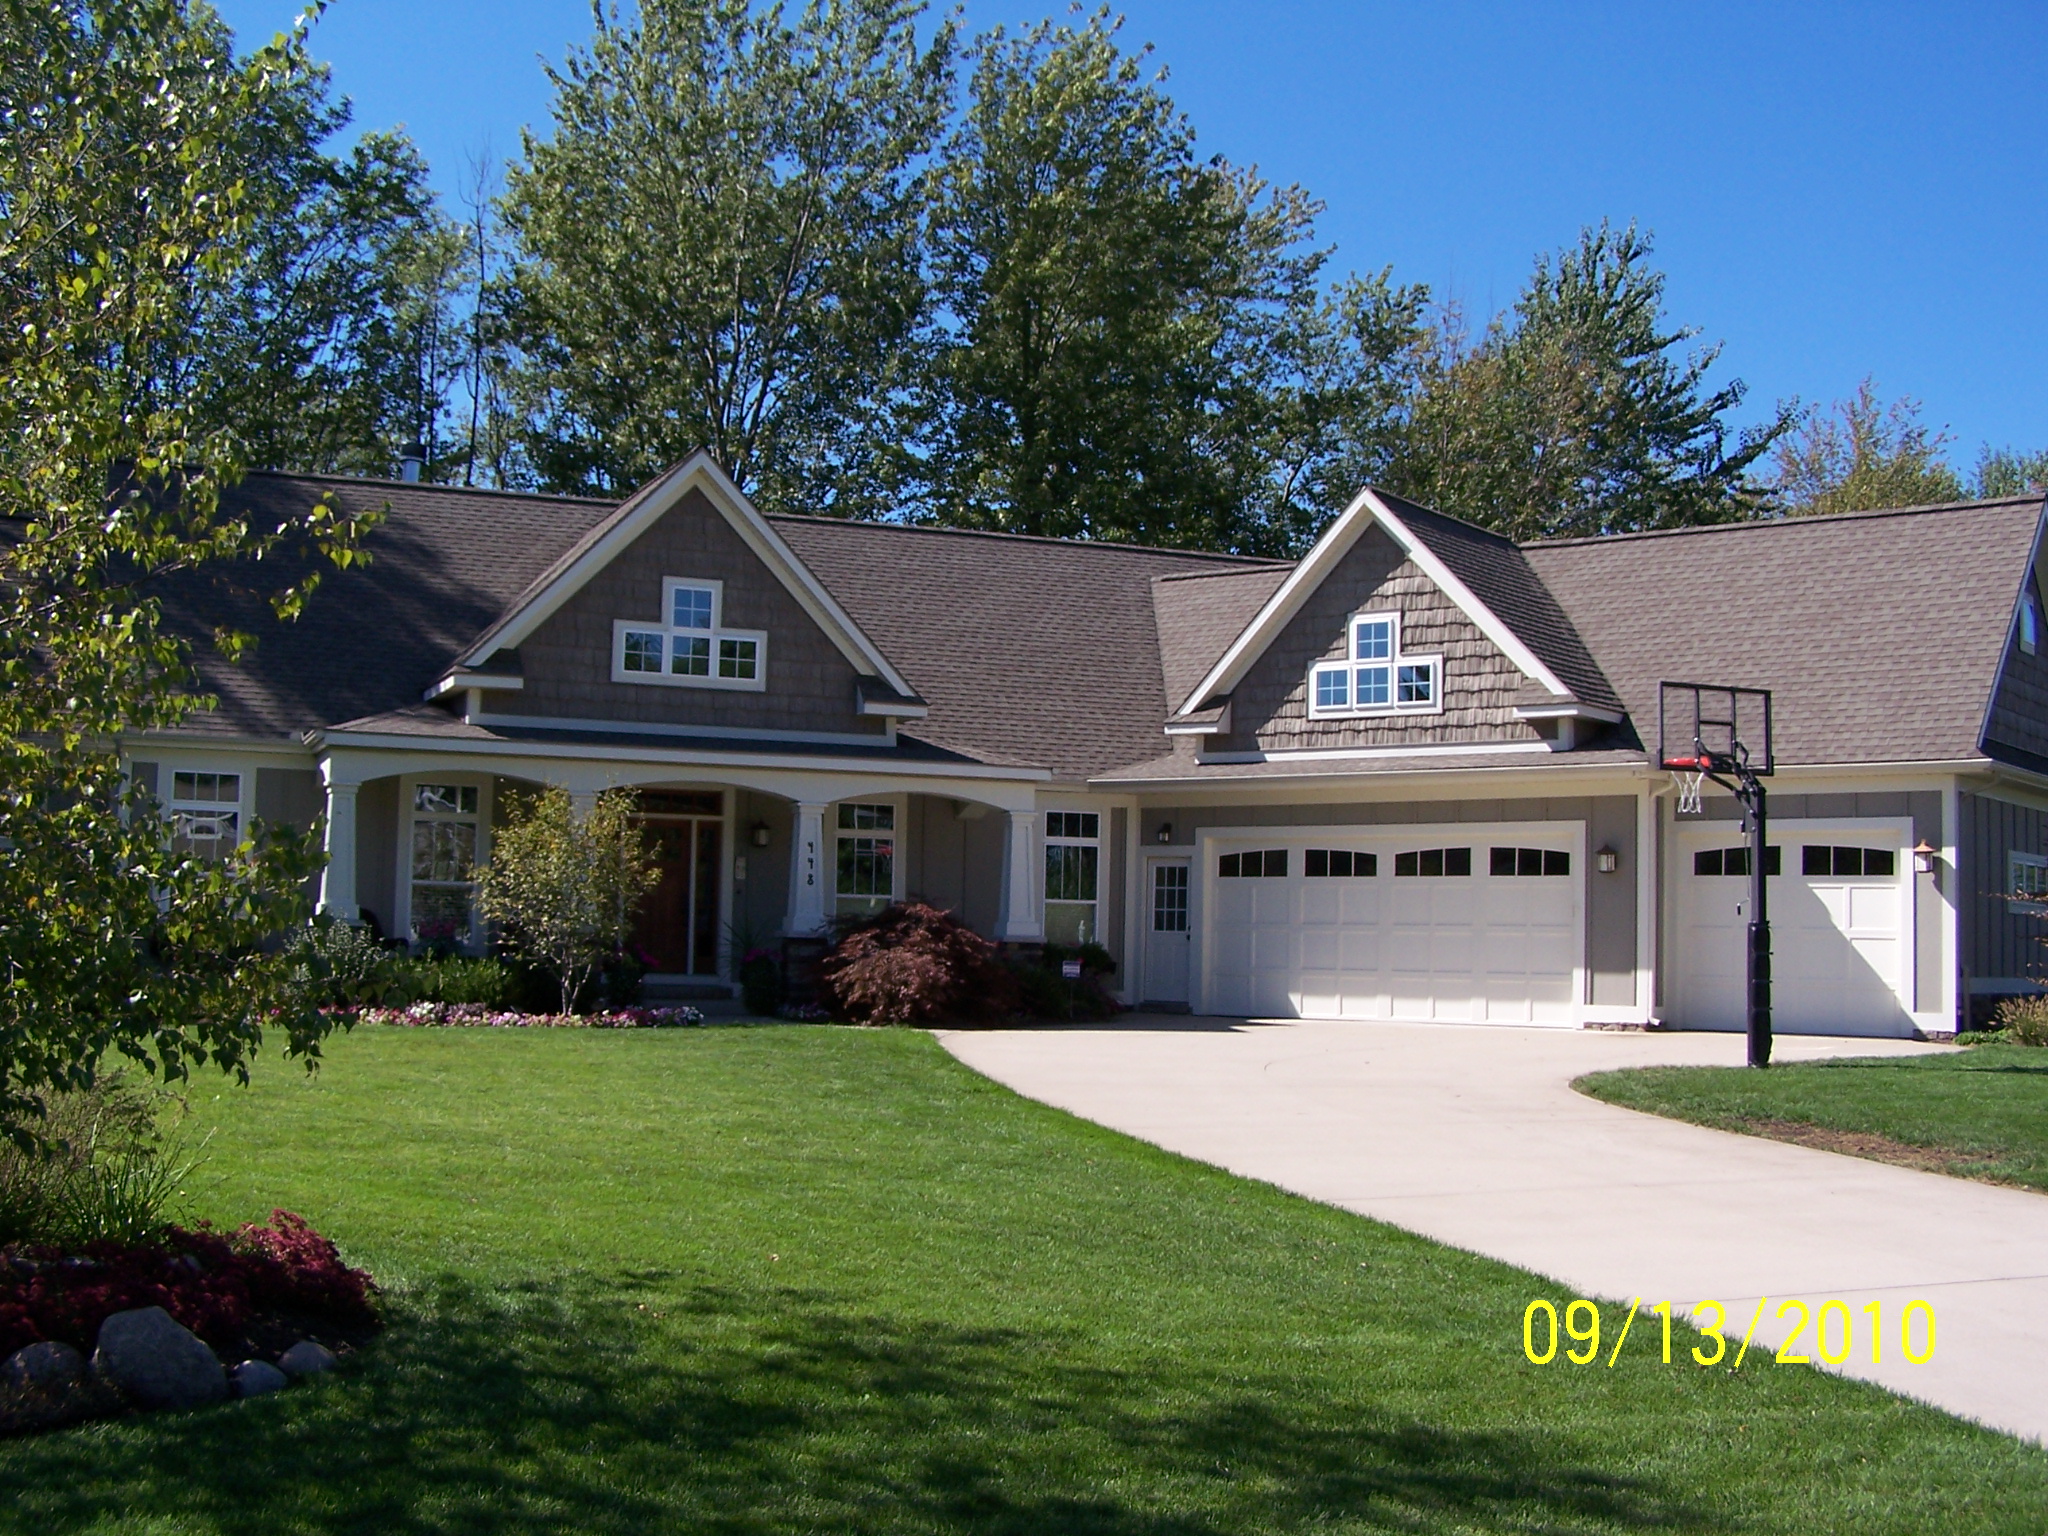 New home with basketball hoop